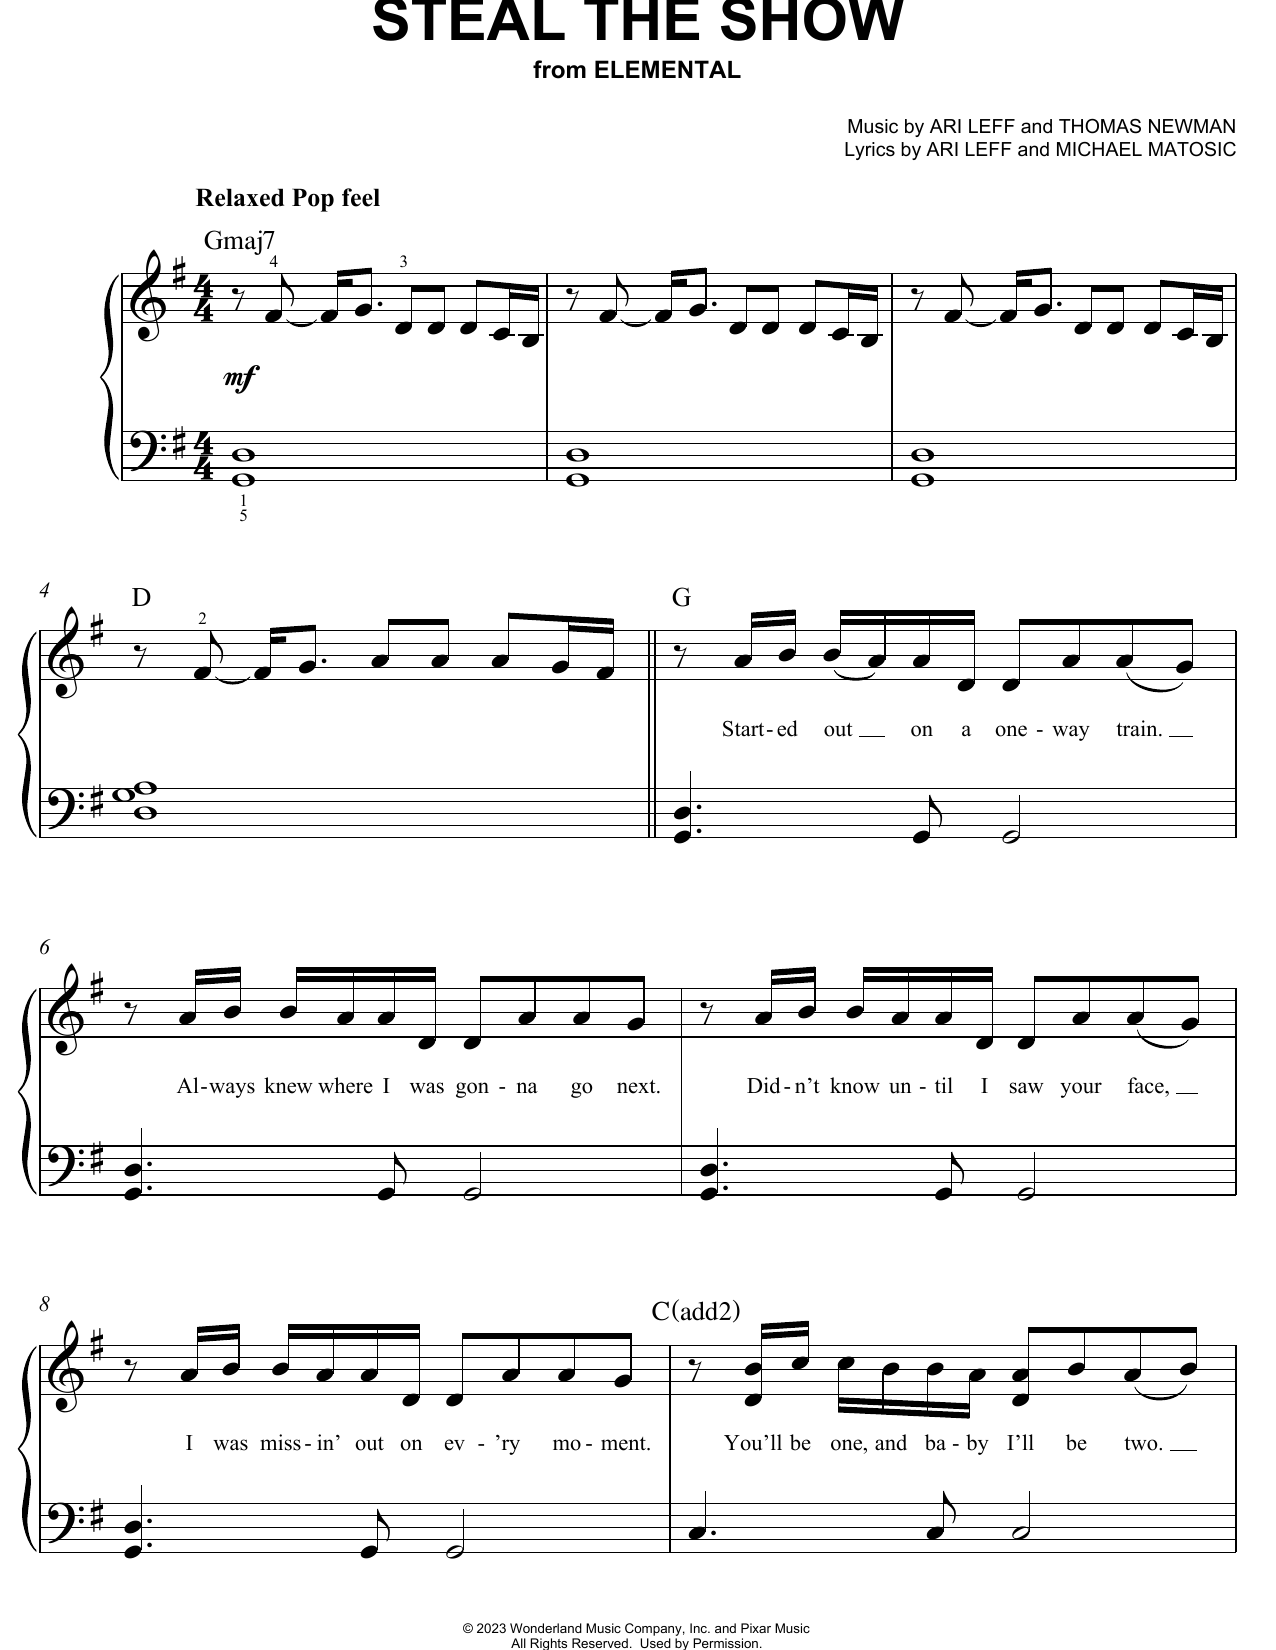 Download Lauv Steal The Show (from Elemental) Sheet Music